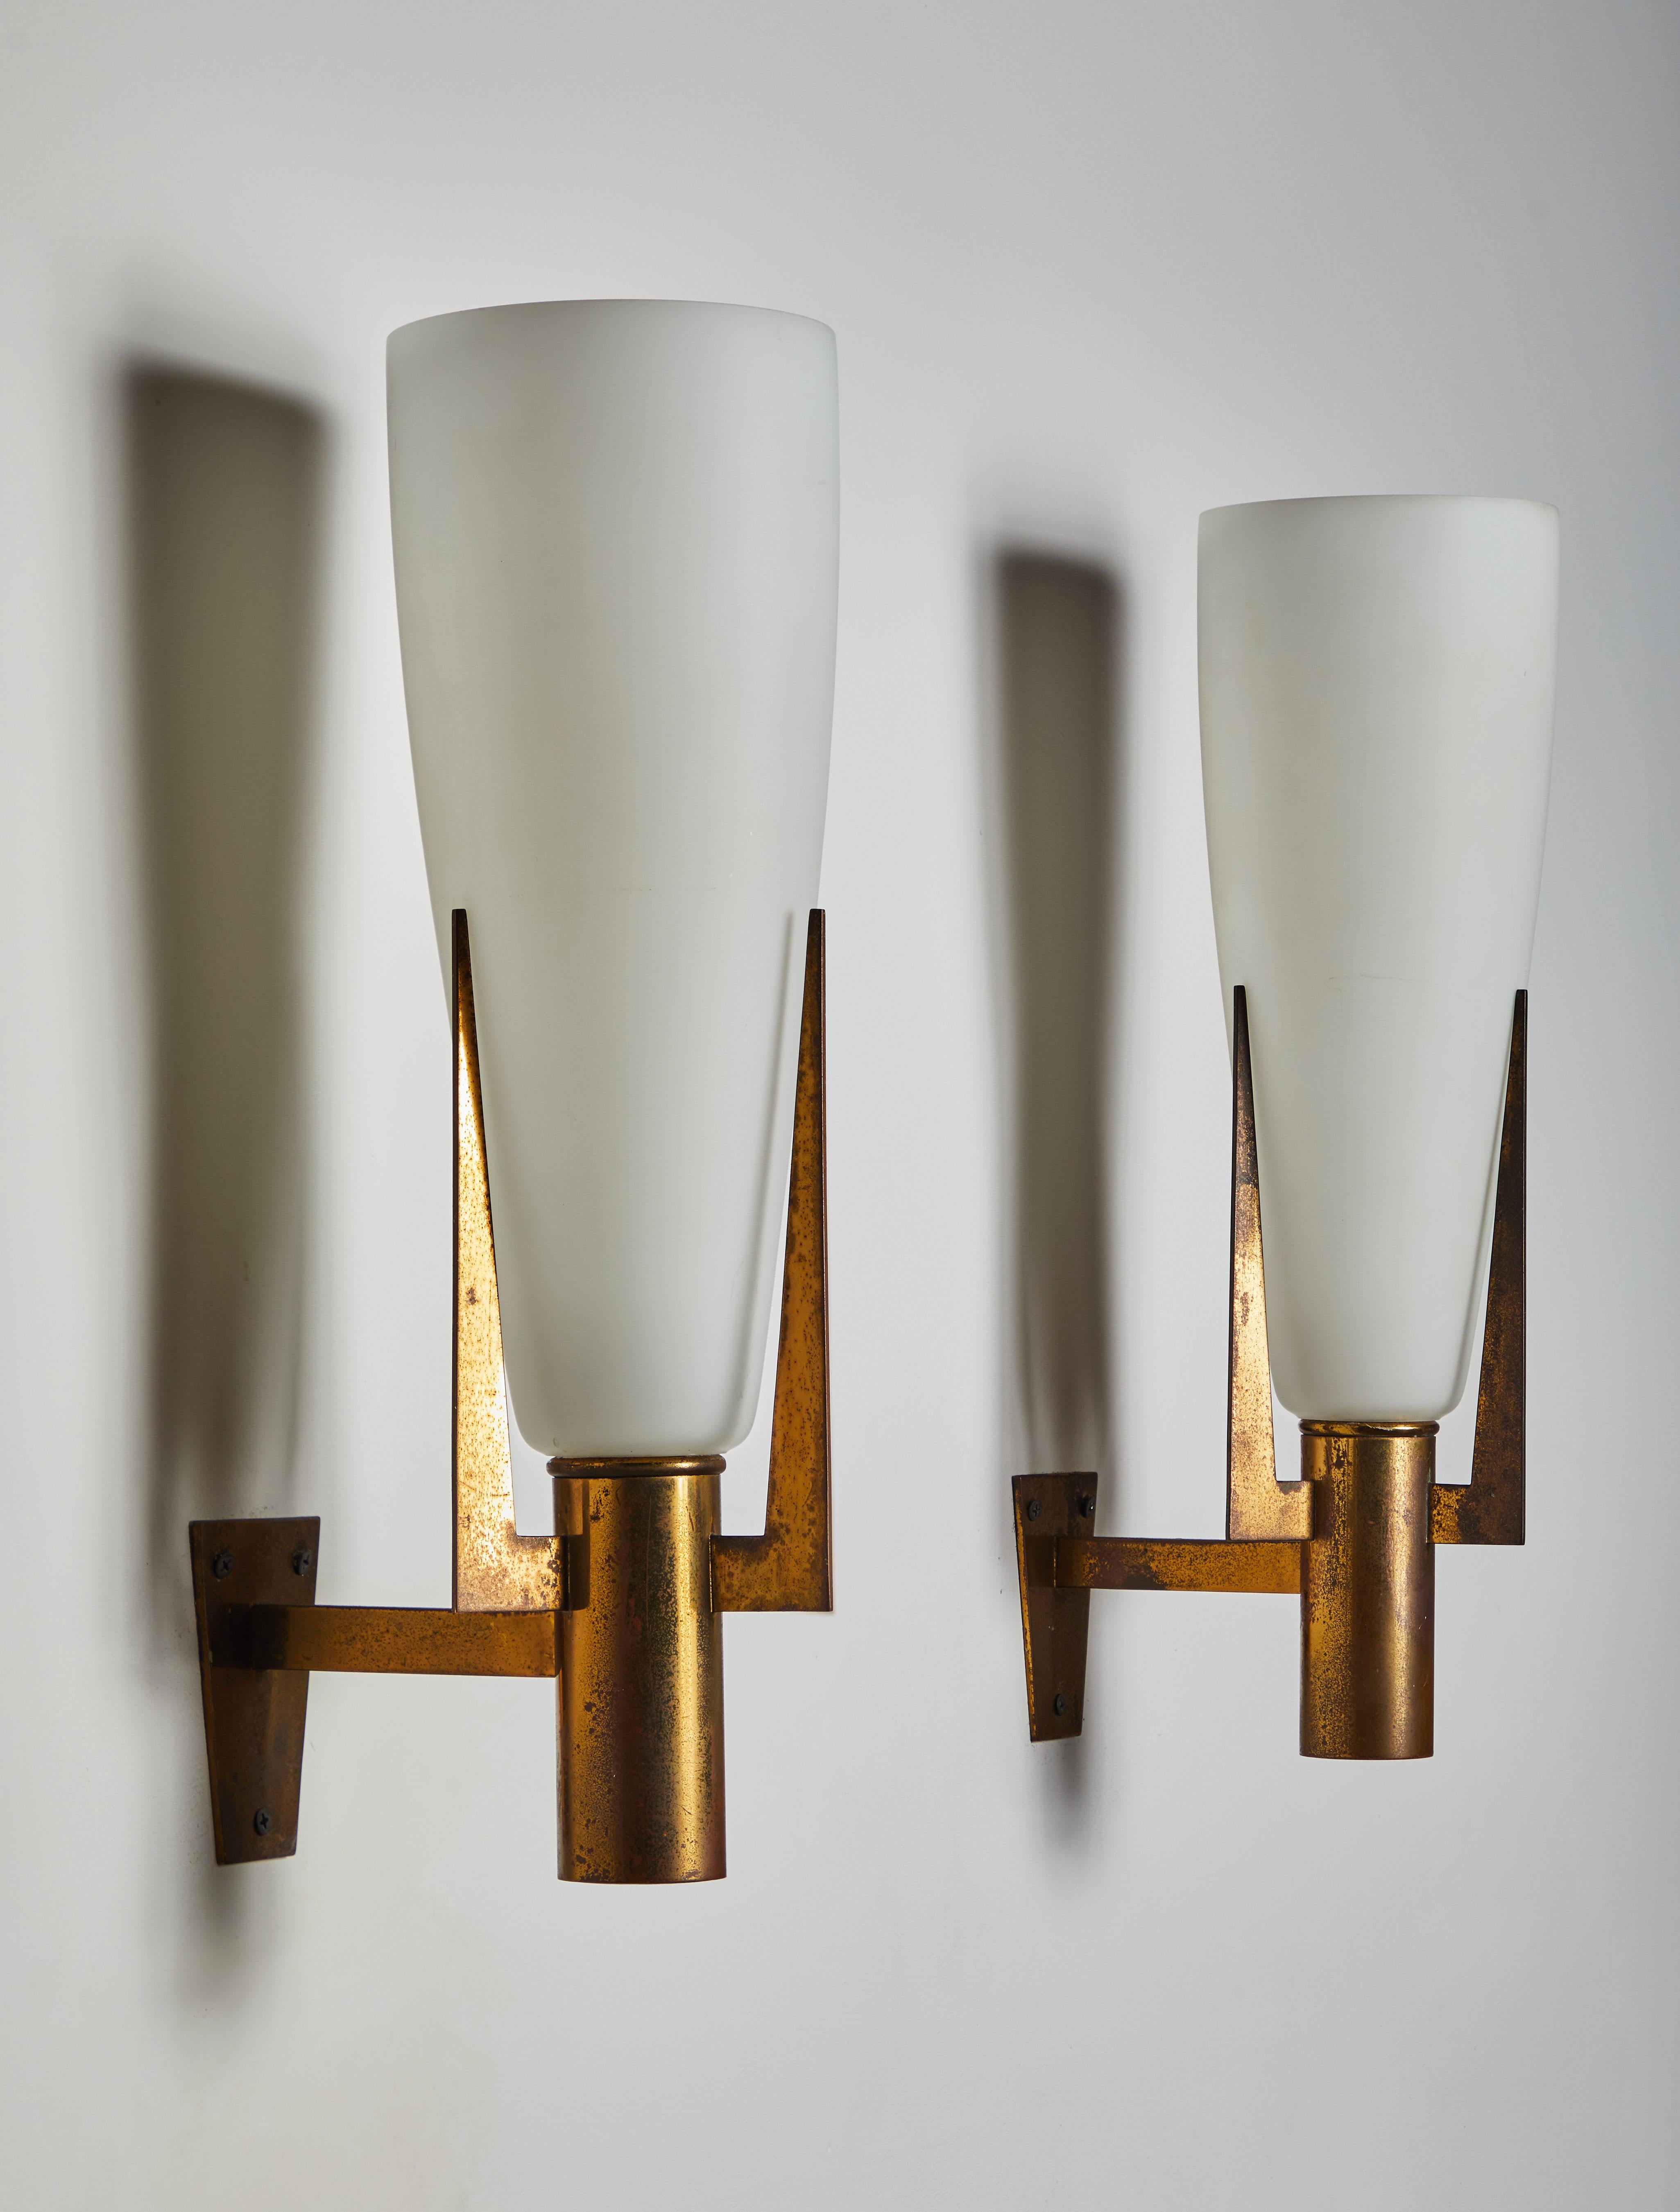 Pair of large sconces by Stilnovo. Manufactured in Italy, circa 1950s. Brass and brushed satin glass diffusers. Rewired for US junction boxes. Each sconces takes one E27 60w maximum bulb. Retains original manufacturer's label.